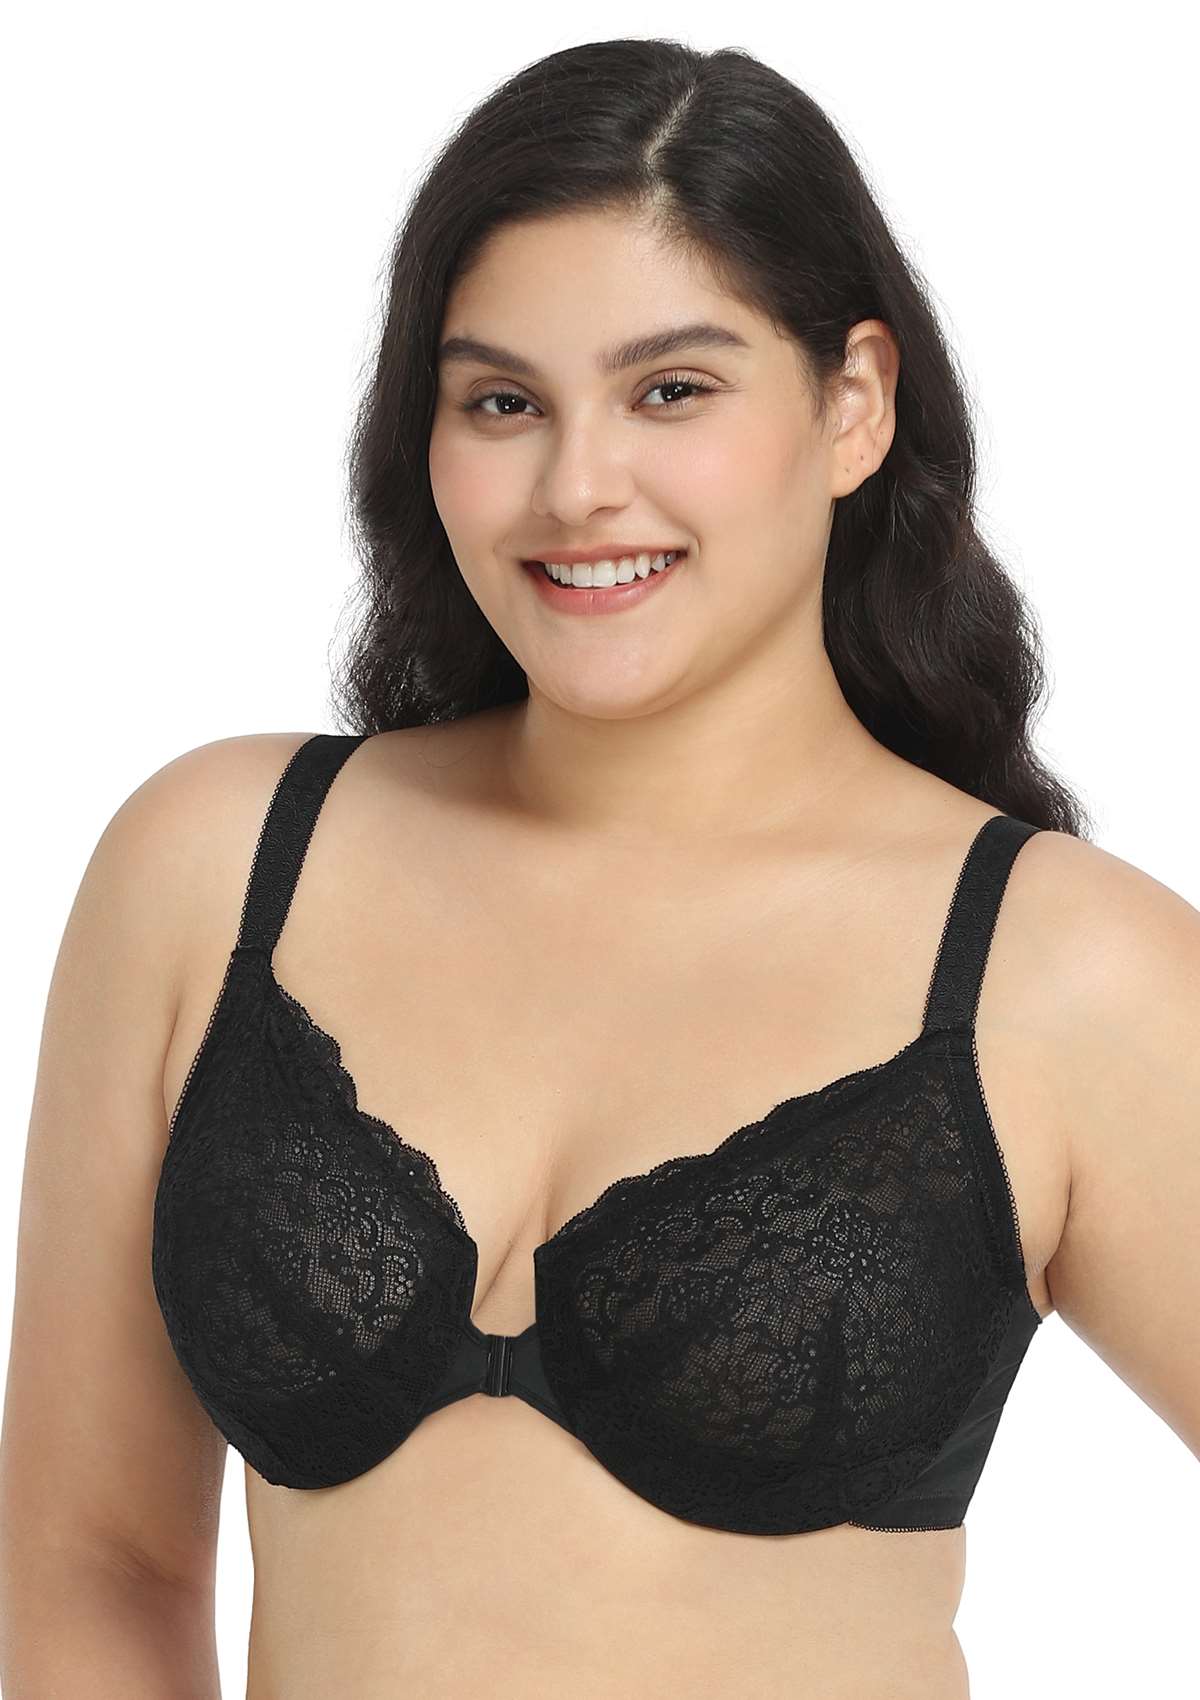 HSIA Nymphaea Front-Close Unlined Retro Floral Lace Back Smoothing Bra - Black / 34 / H